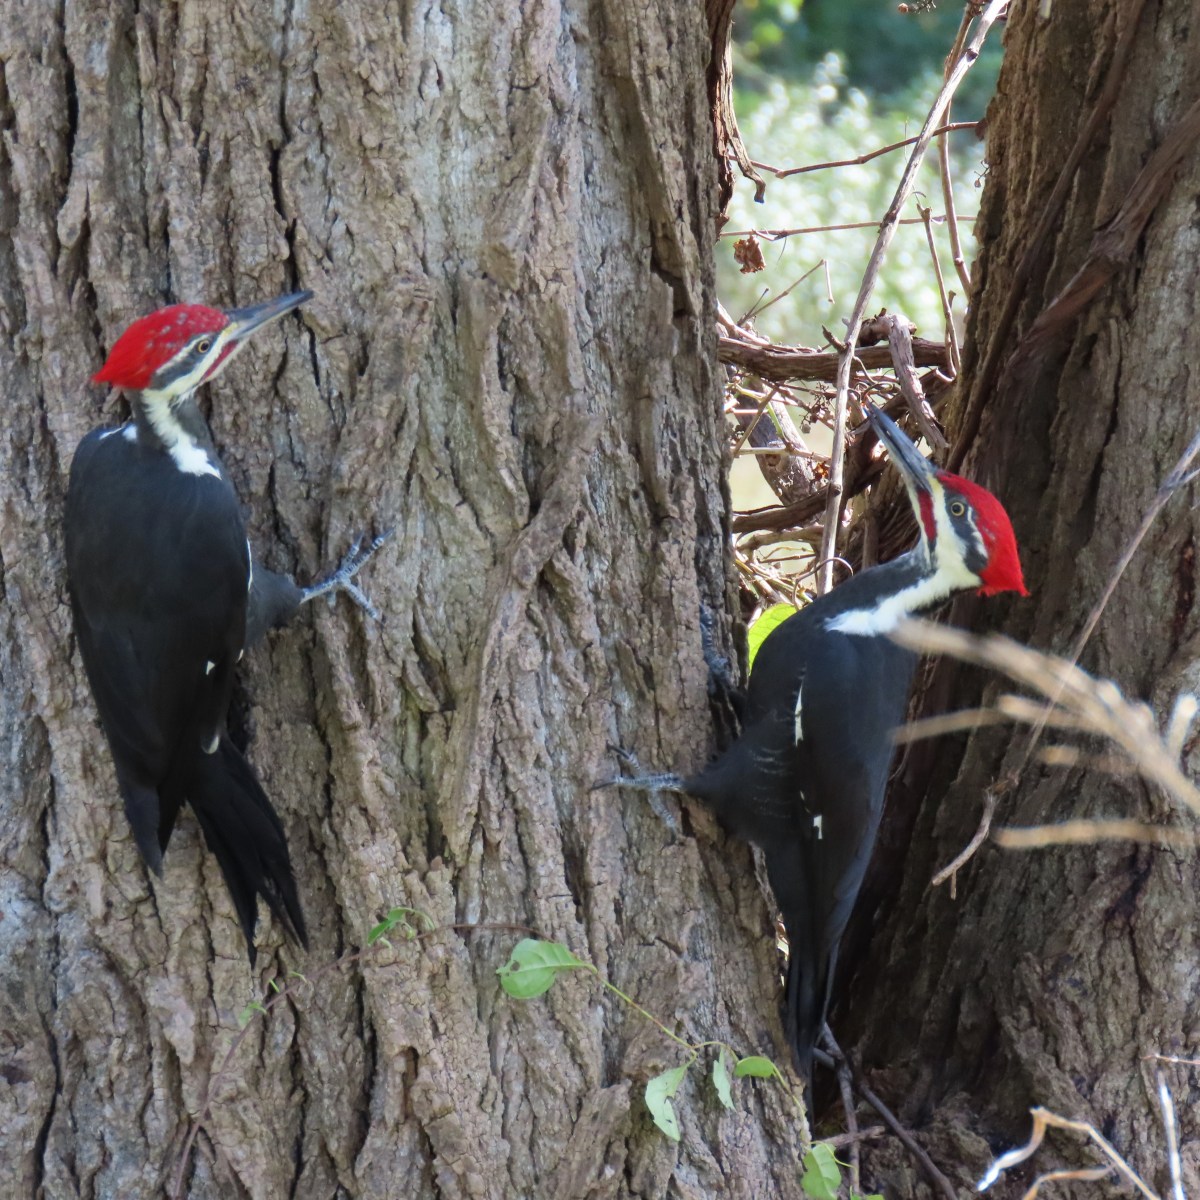 Two pileated woodpeckers